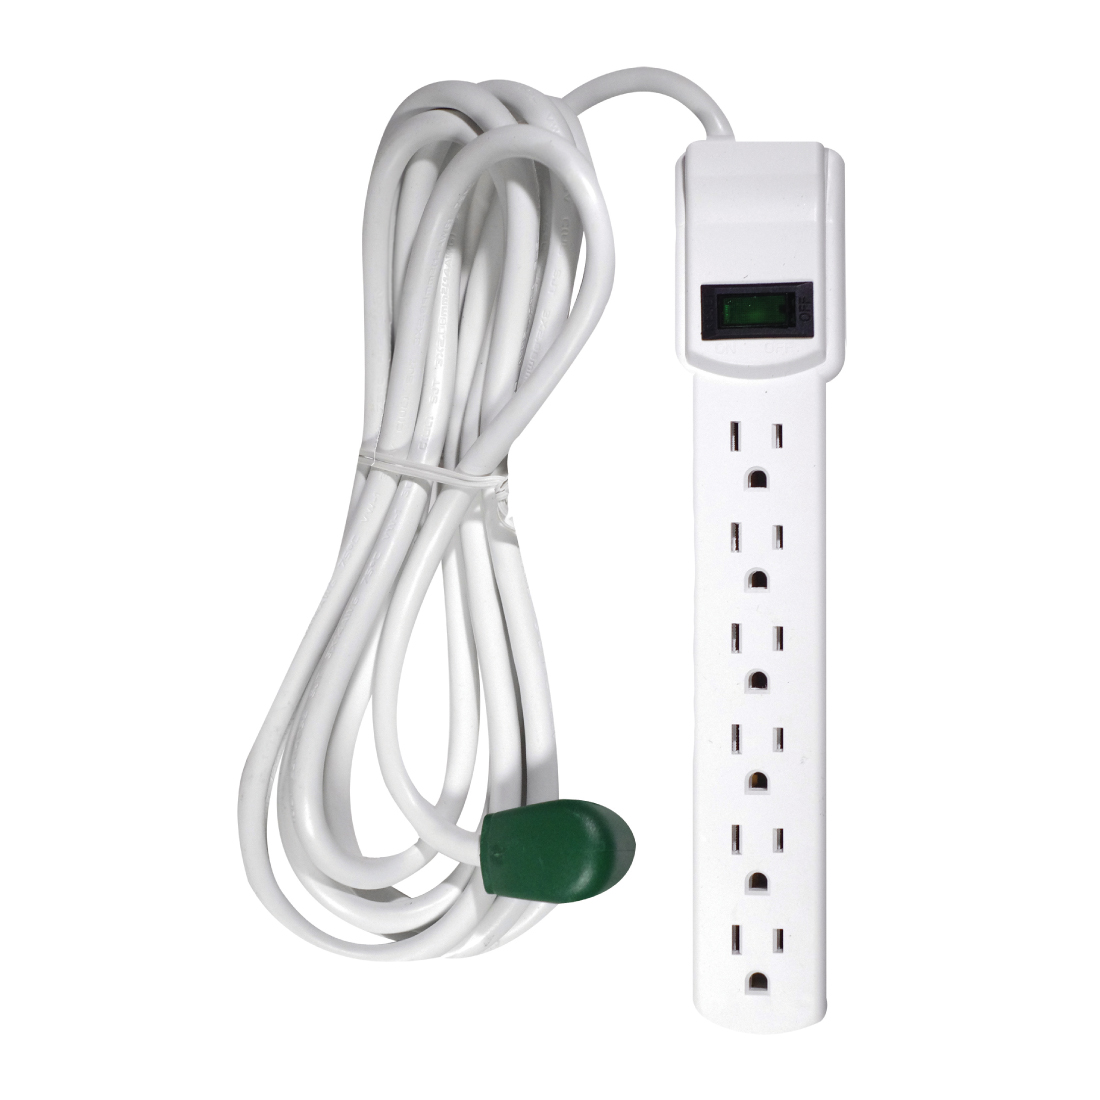 GoGreen Power GG-16103M-12 - 6 Outlet Surge Protector With 12ft Cord, White - image 1 of 8